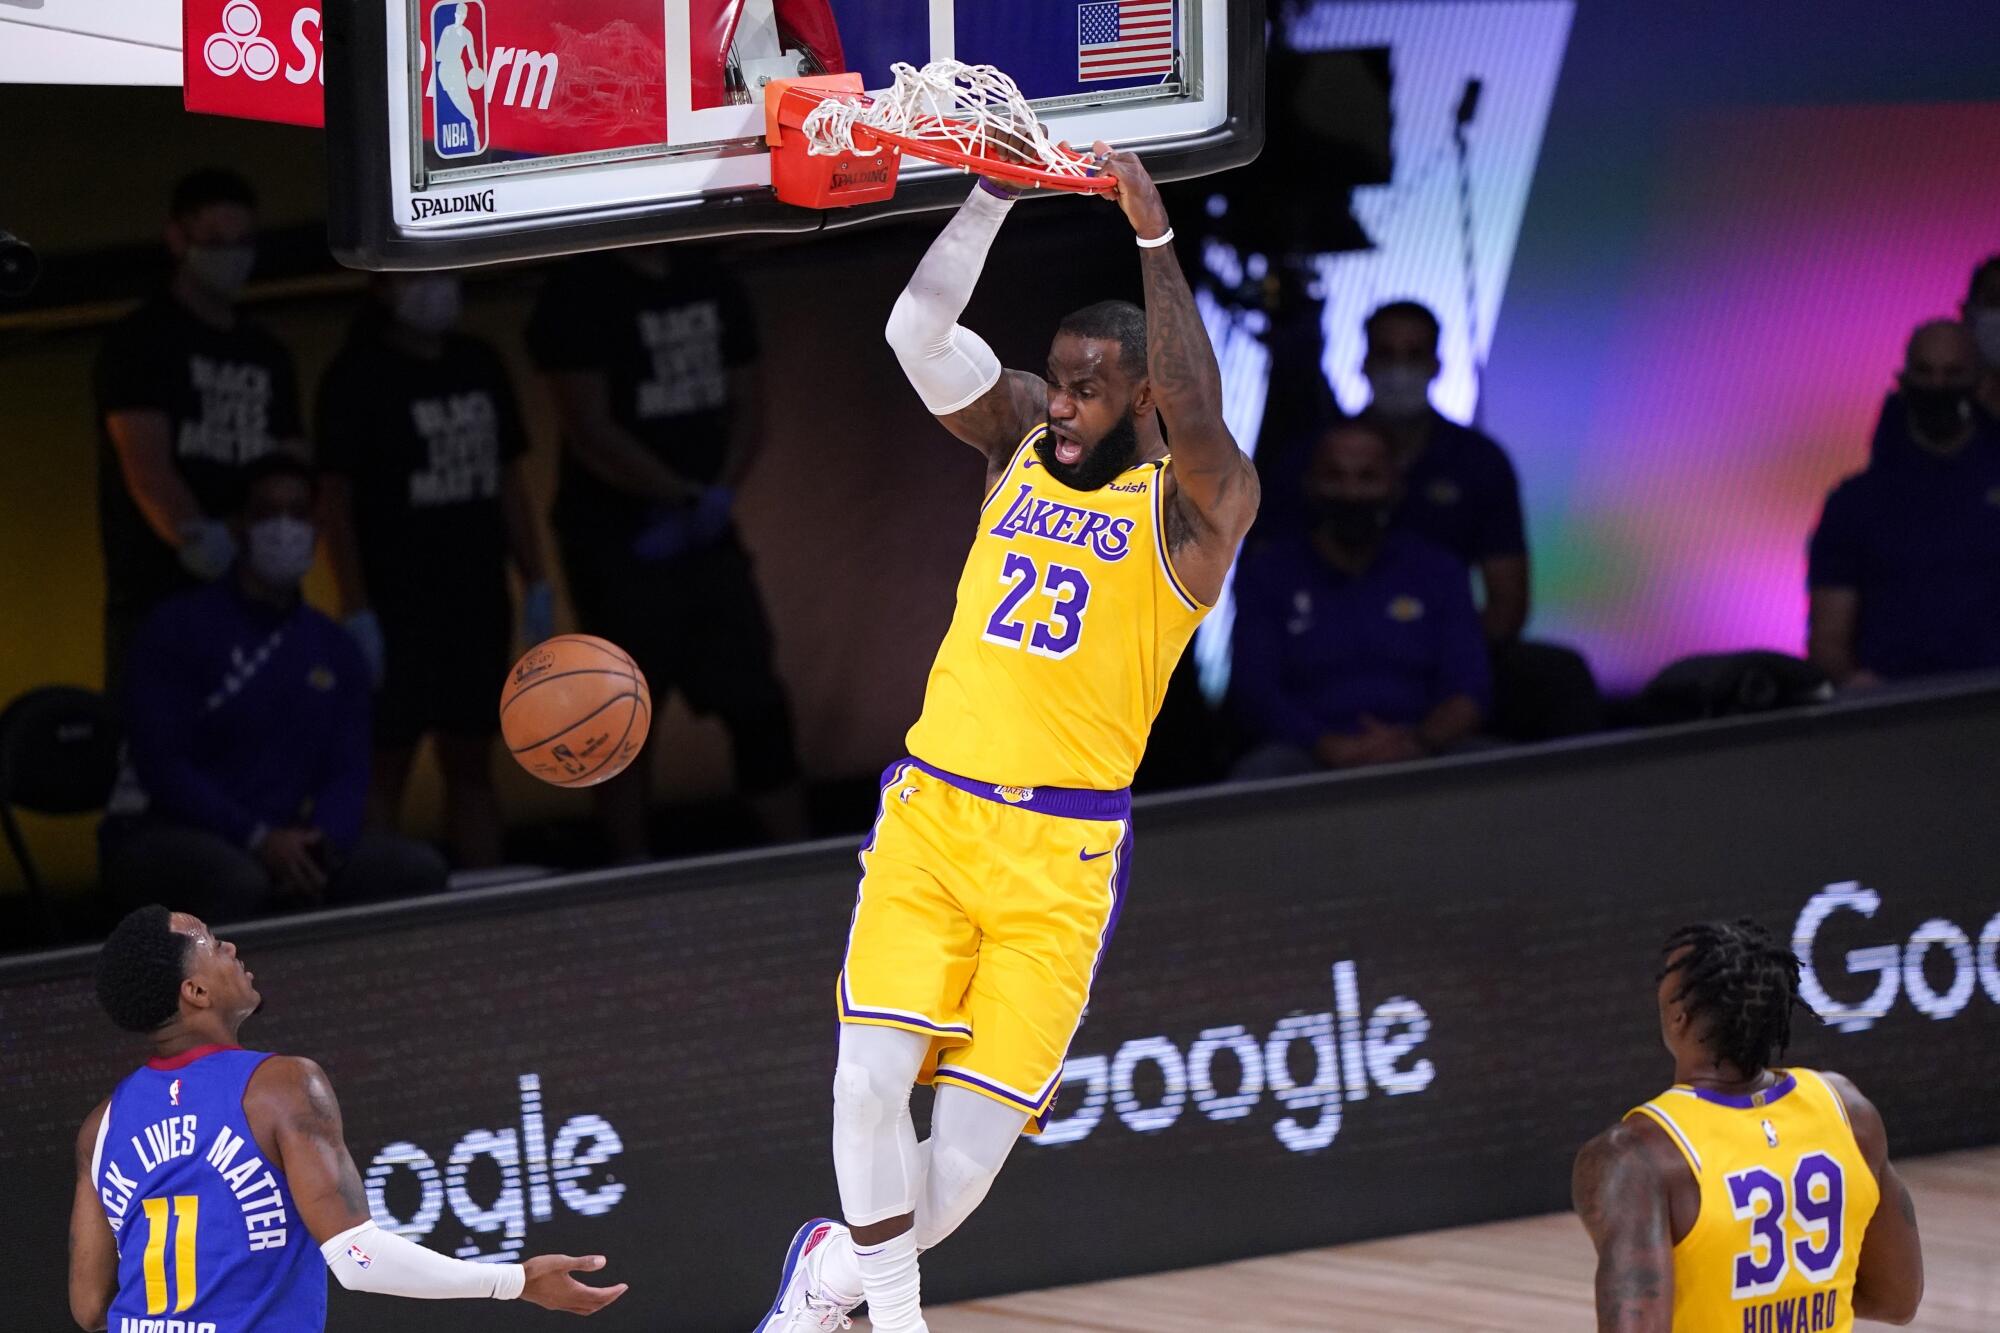 Lakers star LeBron James dunks during the first half against the Denver Nuggets.